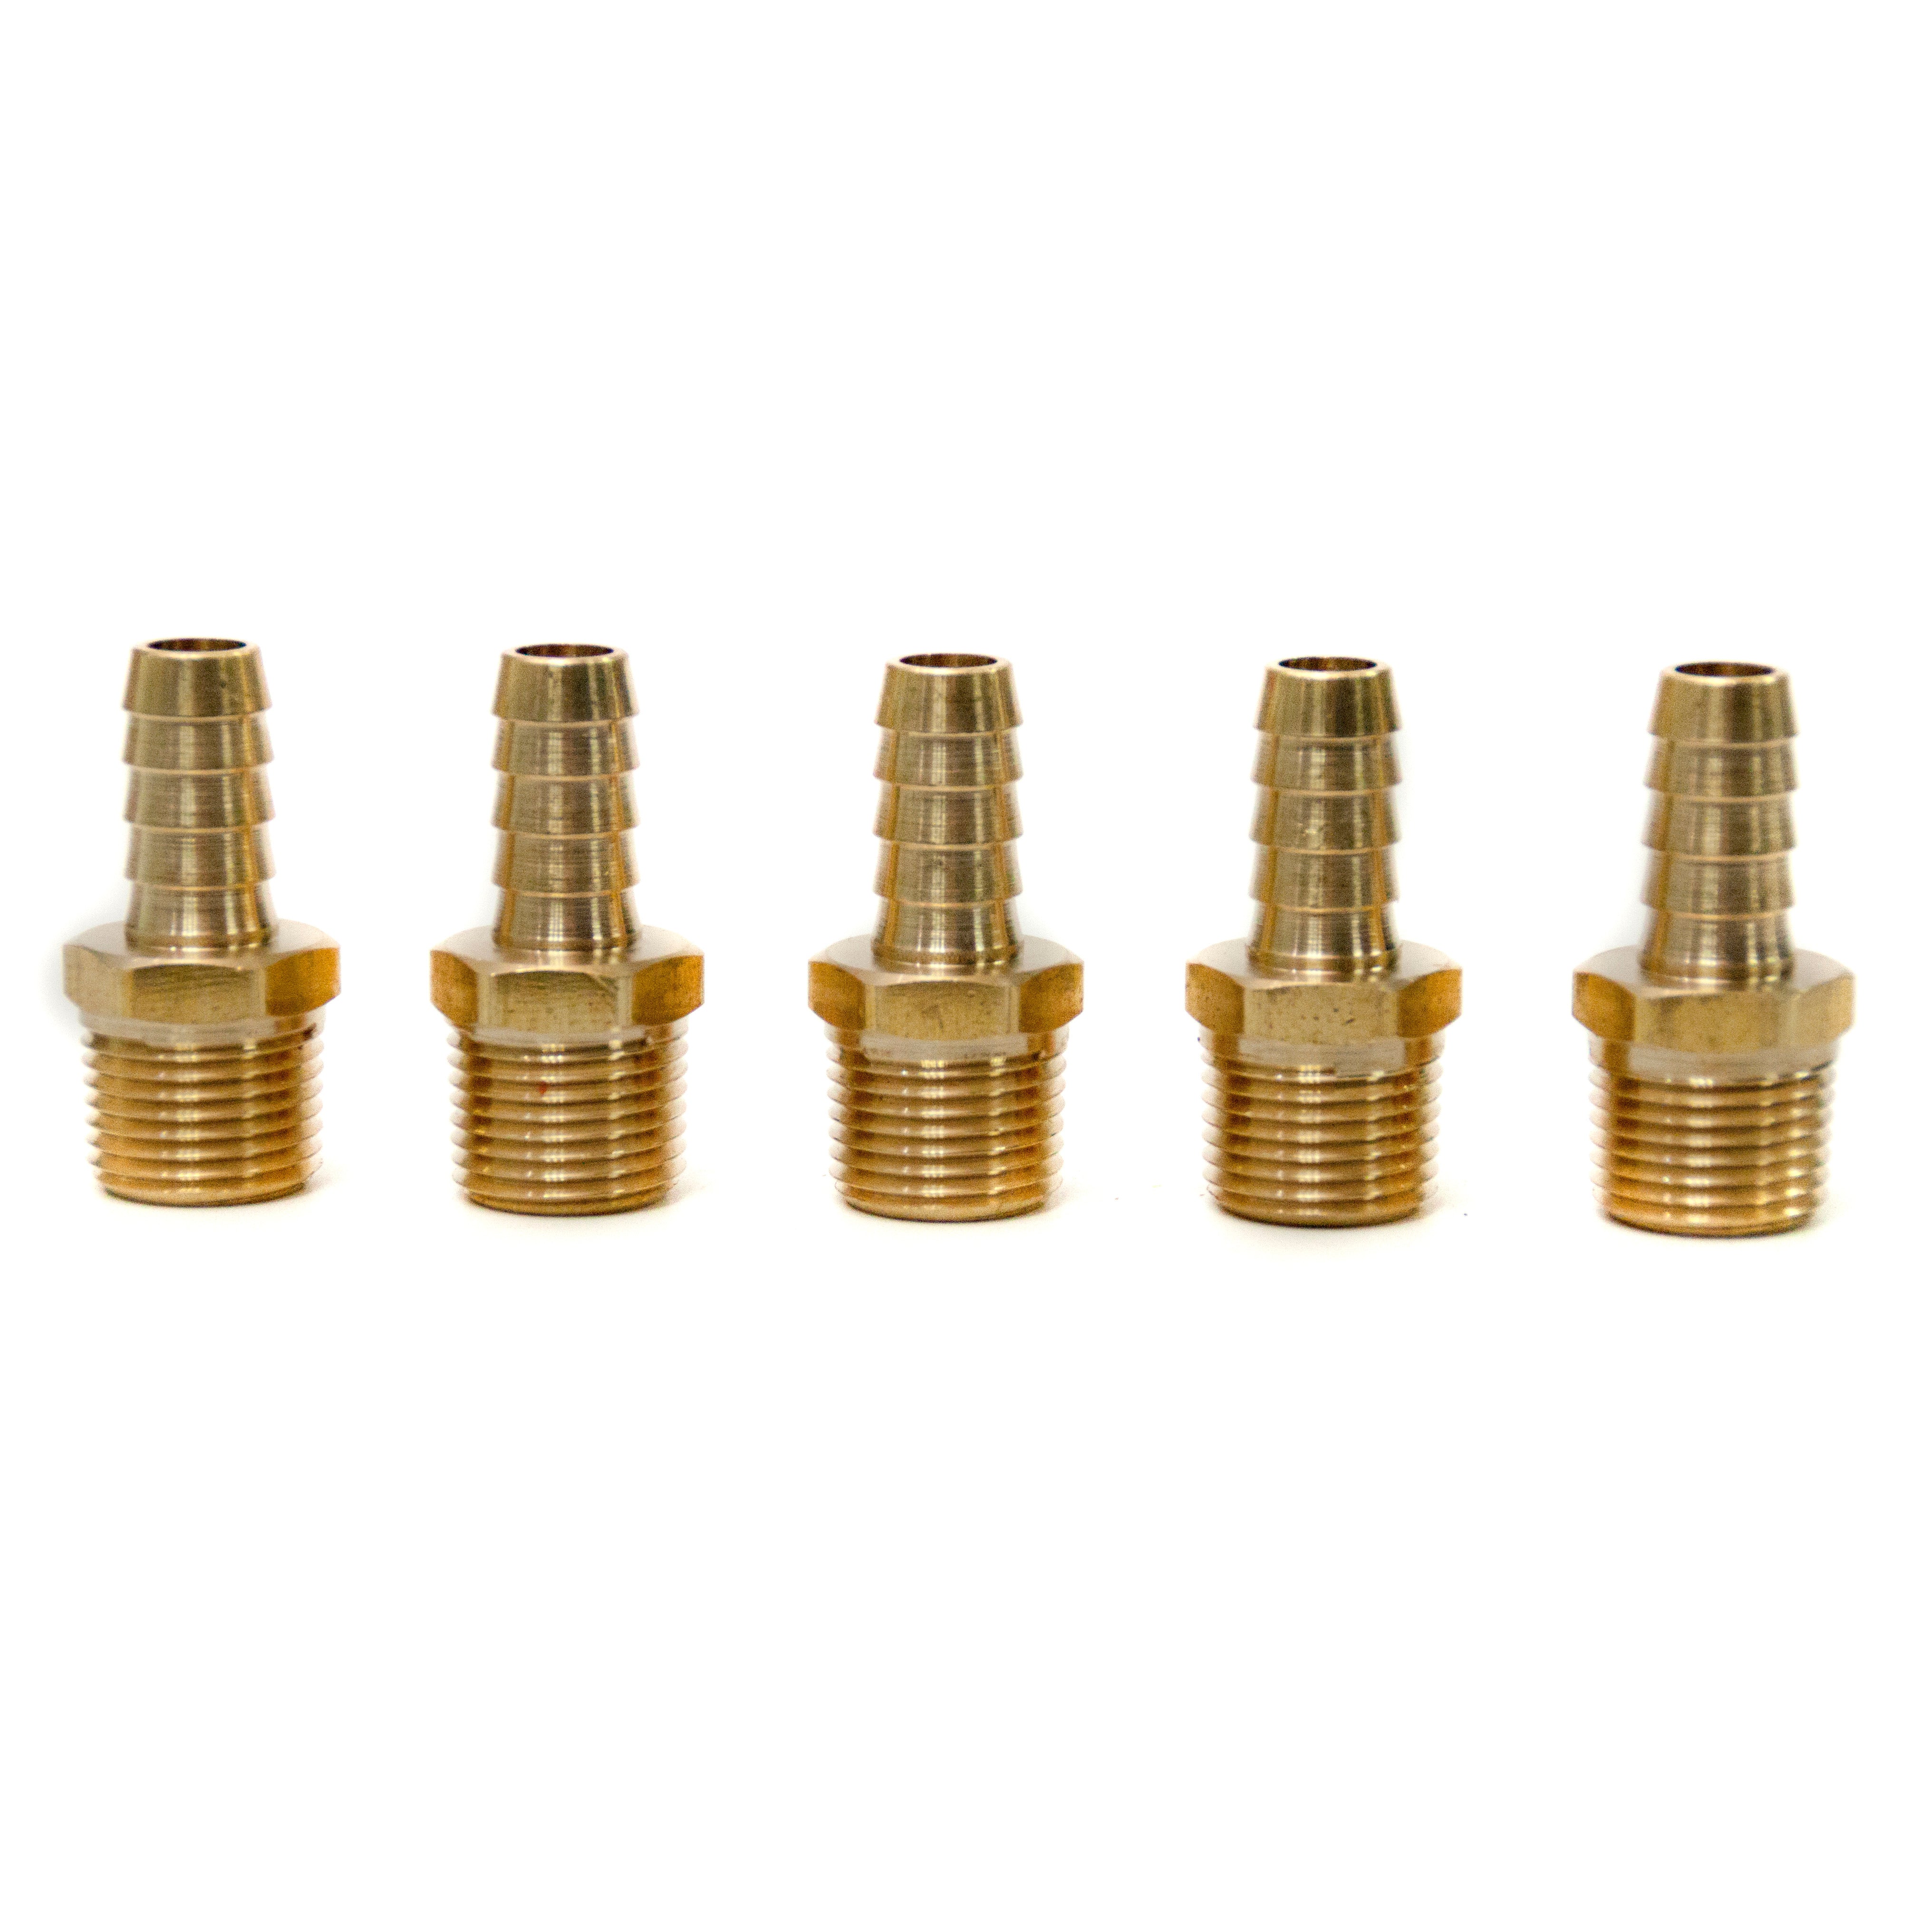 LTWFITTING Brass Barb Fitting Coupler/Connector 3/8-Inch Hose ID x 3/8-Inch Male NPT Fuel(Pack of 5)